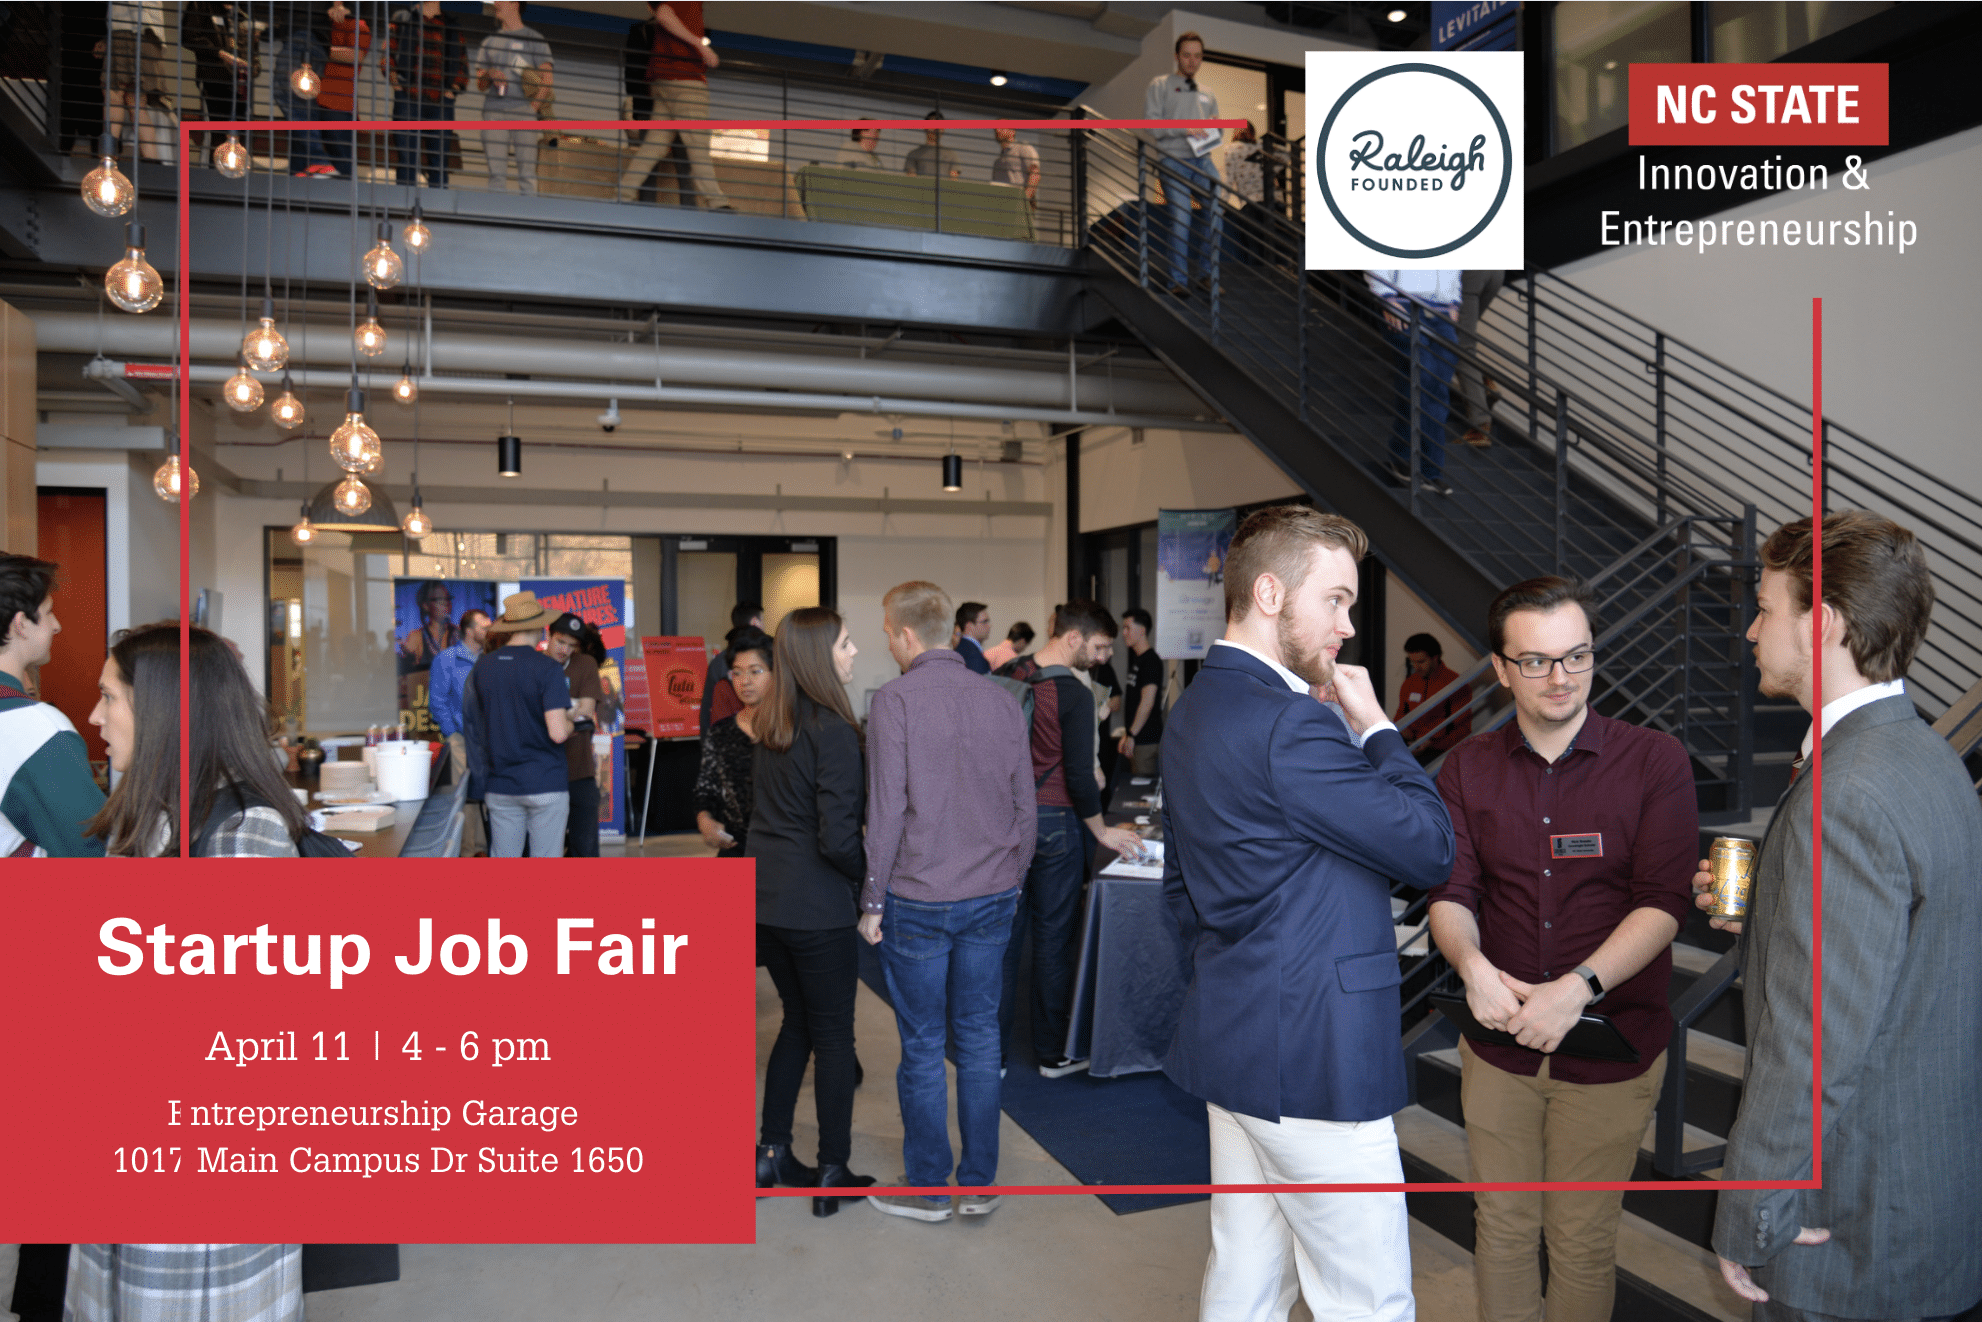 Startup job fair with Raleigh Founded advertisement